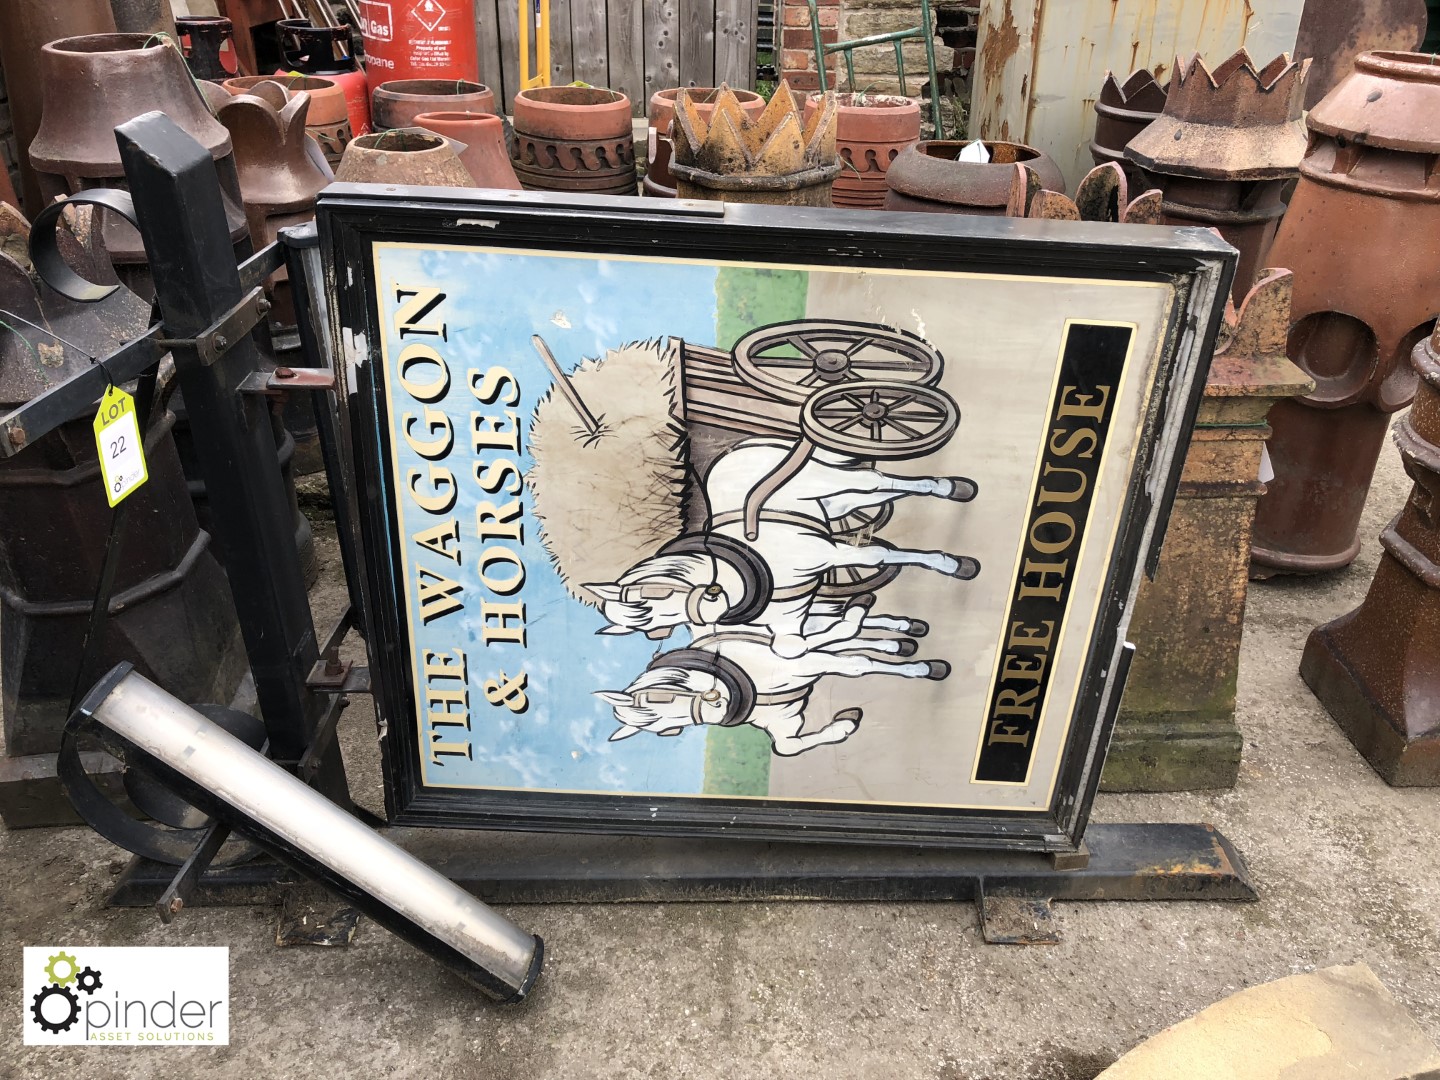 Steel framed mounted swing Pub Sign “The Waggon and Horses”